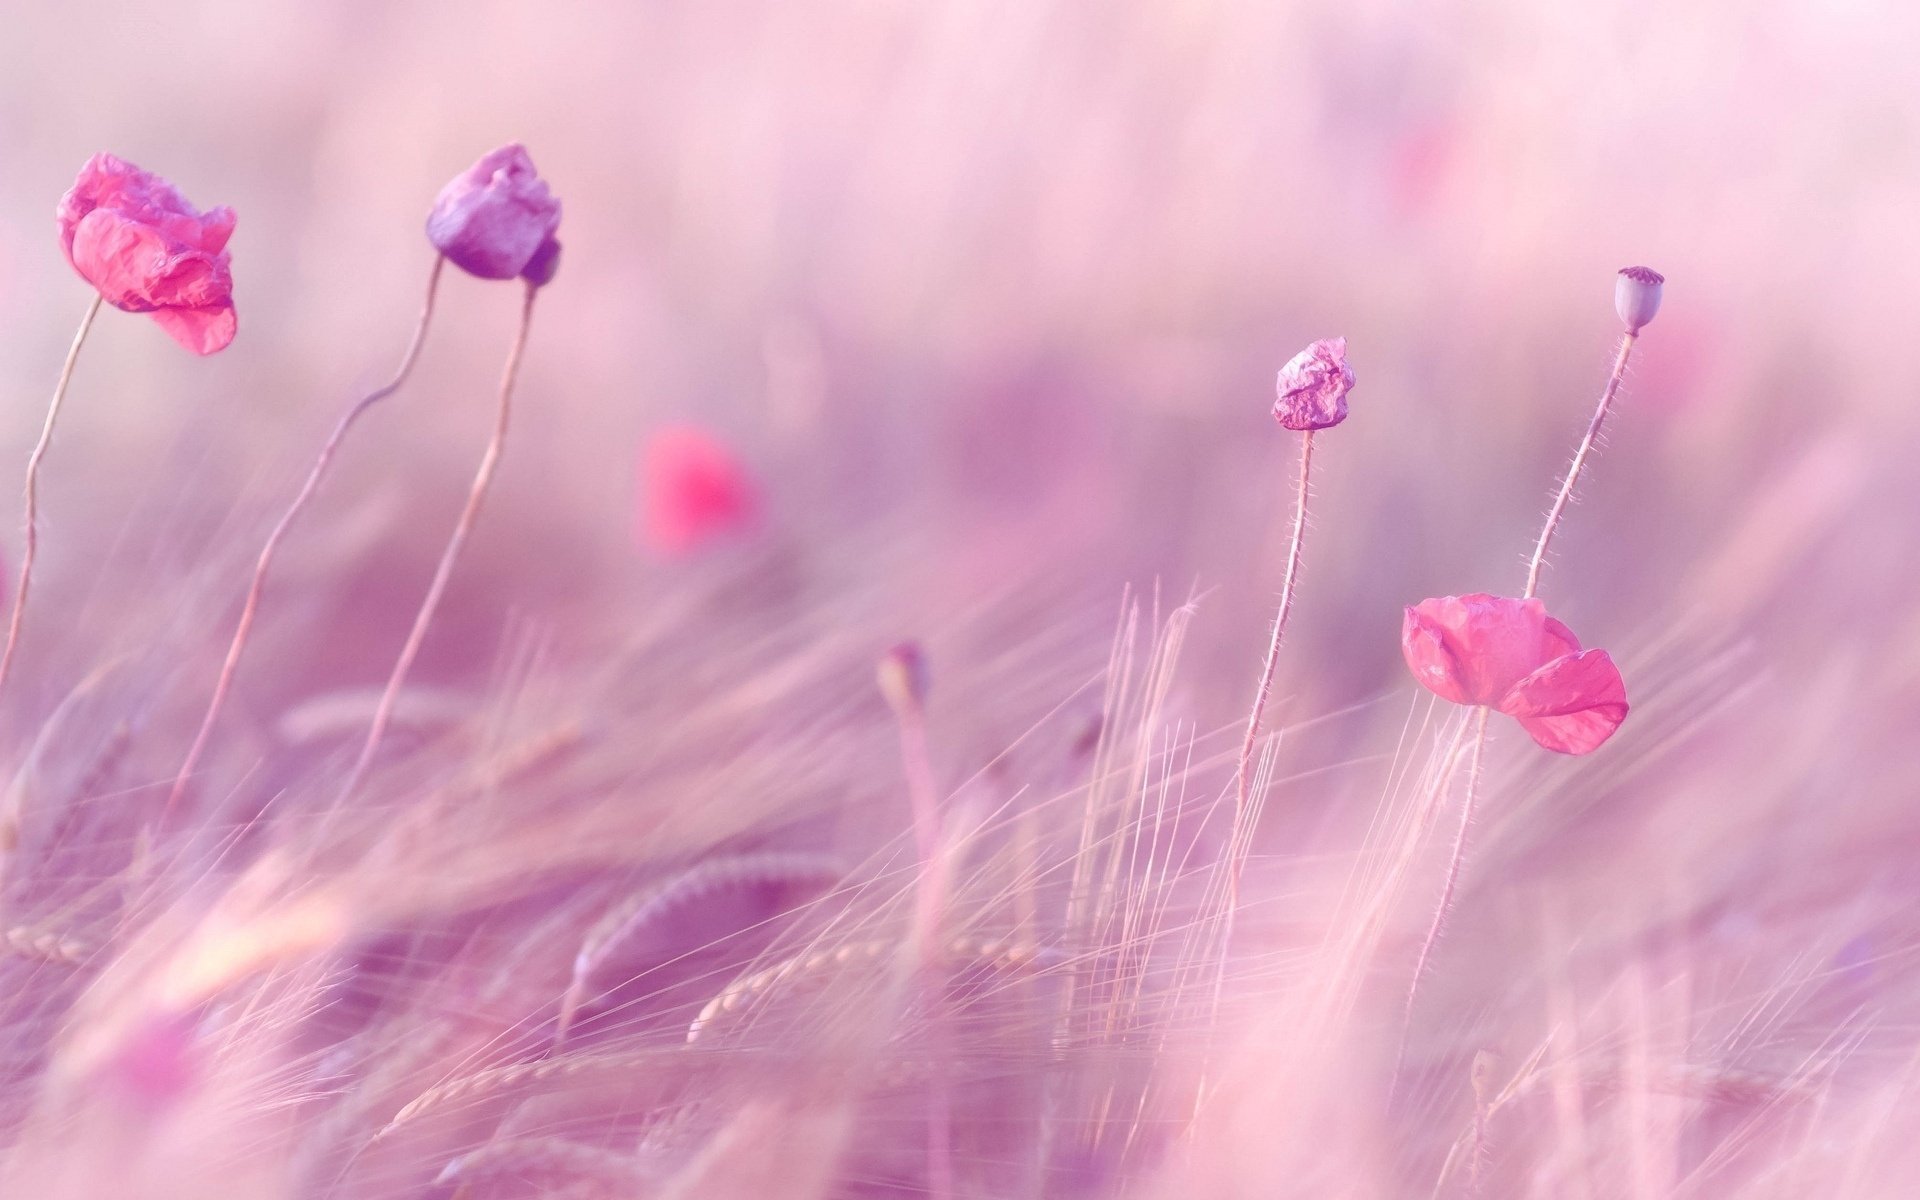 Ears of wheat and pink flowers on the field